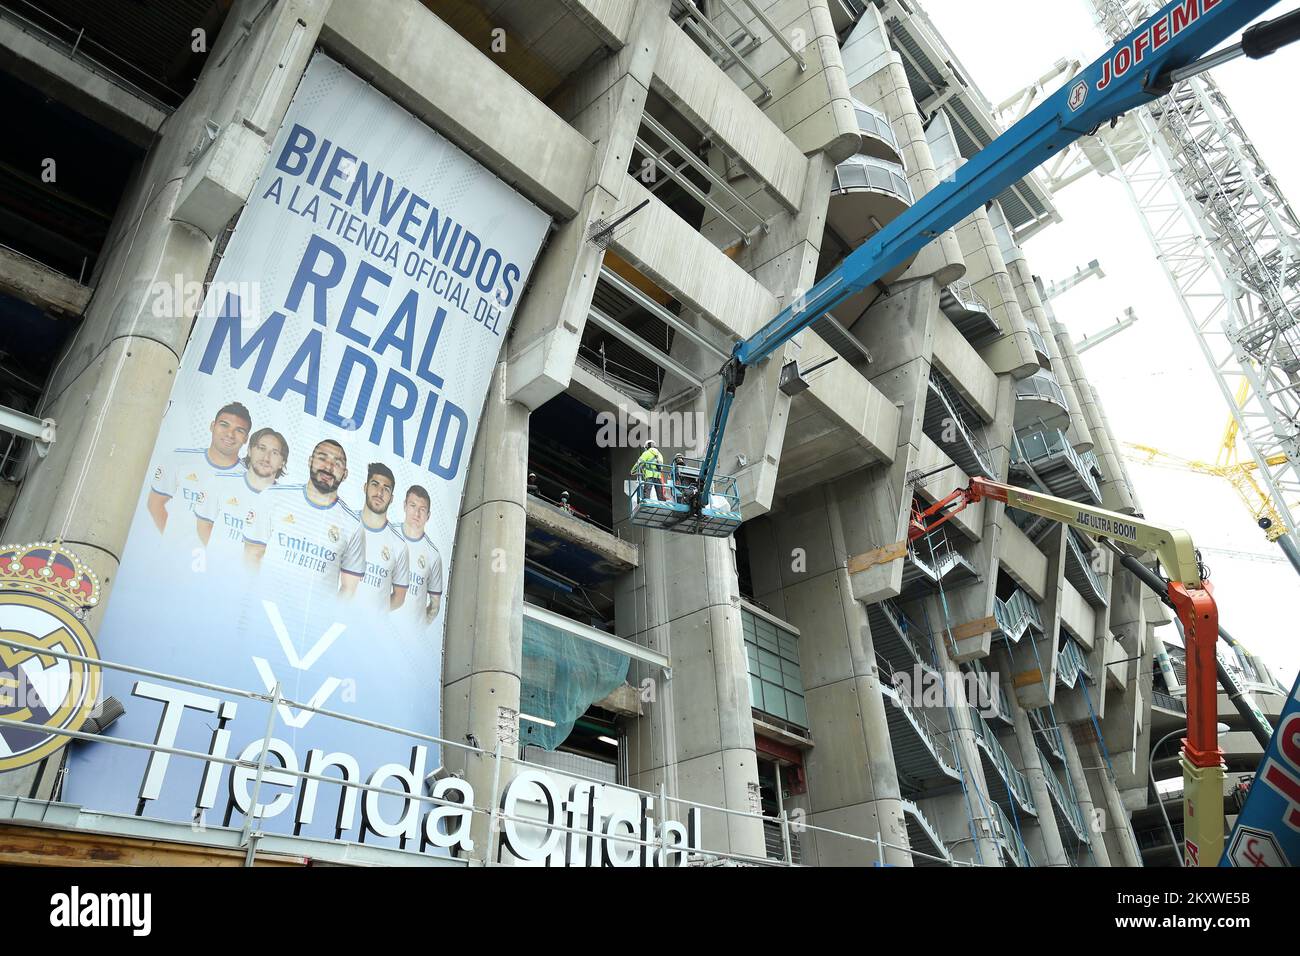 Workers are working on the renovation of the Santiago Bernabeu Stadium in Madrid, Spain on December 4, 2021. Renovation work is underway at Real's Santiago Bernabeu Stadium. The attractive building in the city itself is especially attractive because of the works that are taking place on it. Many curious people pass by and admire this magnificent edition. Photo: Sanjin Strukic/PIXSELL Stock Photo